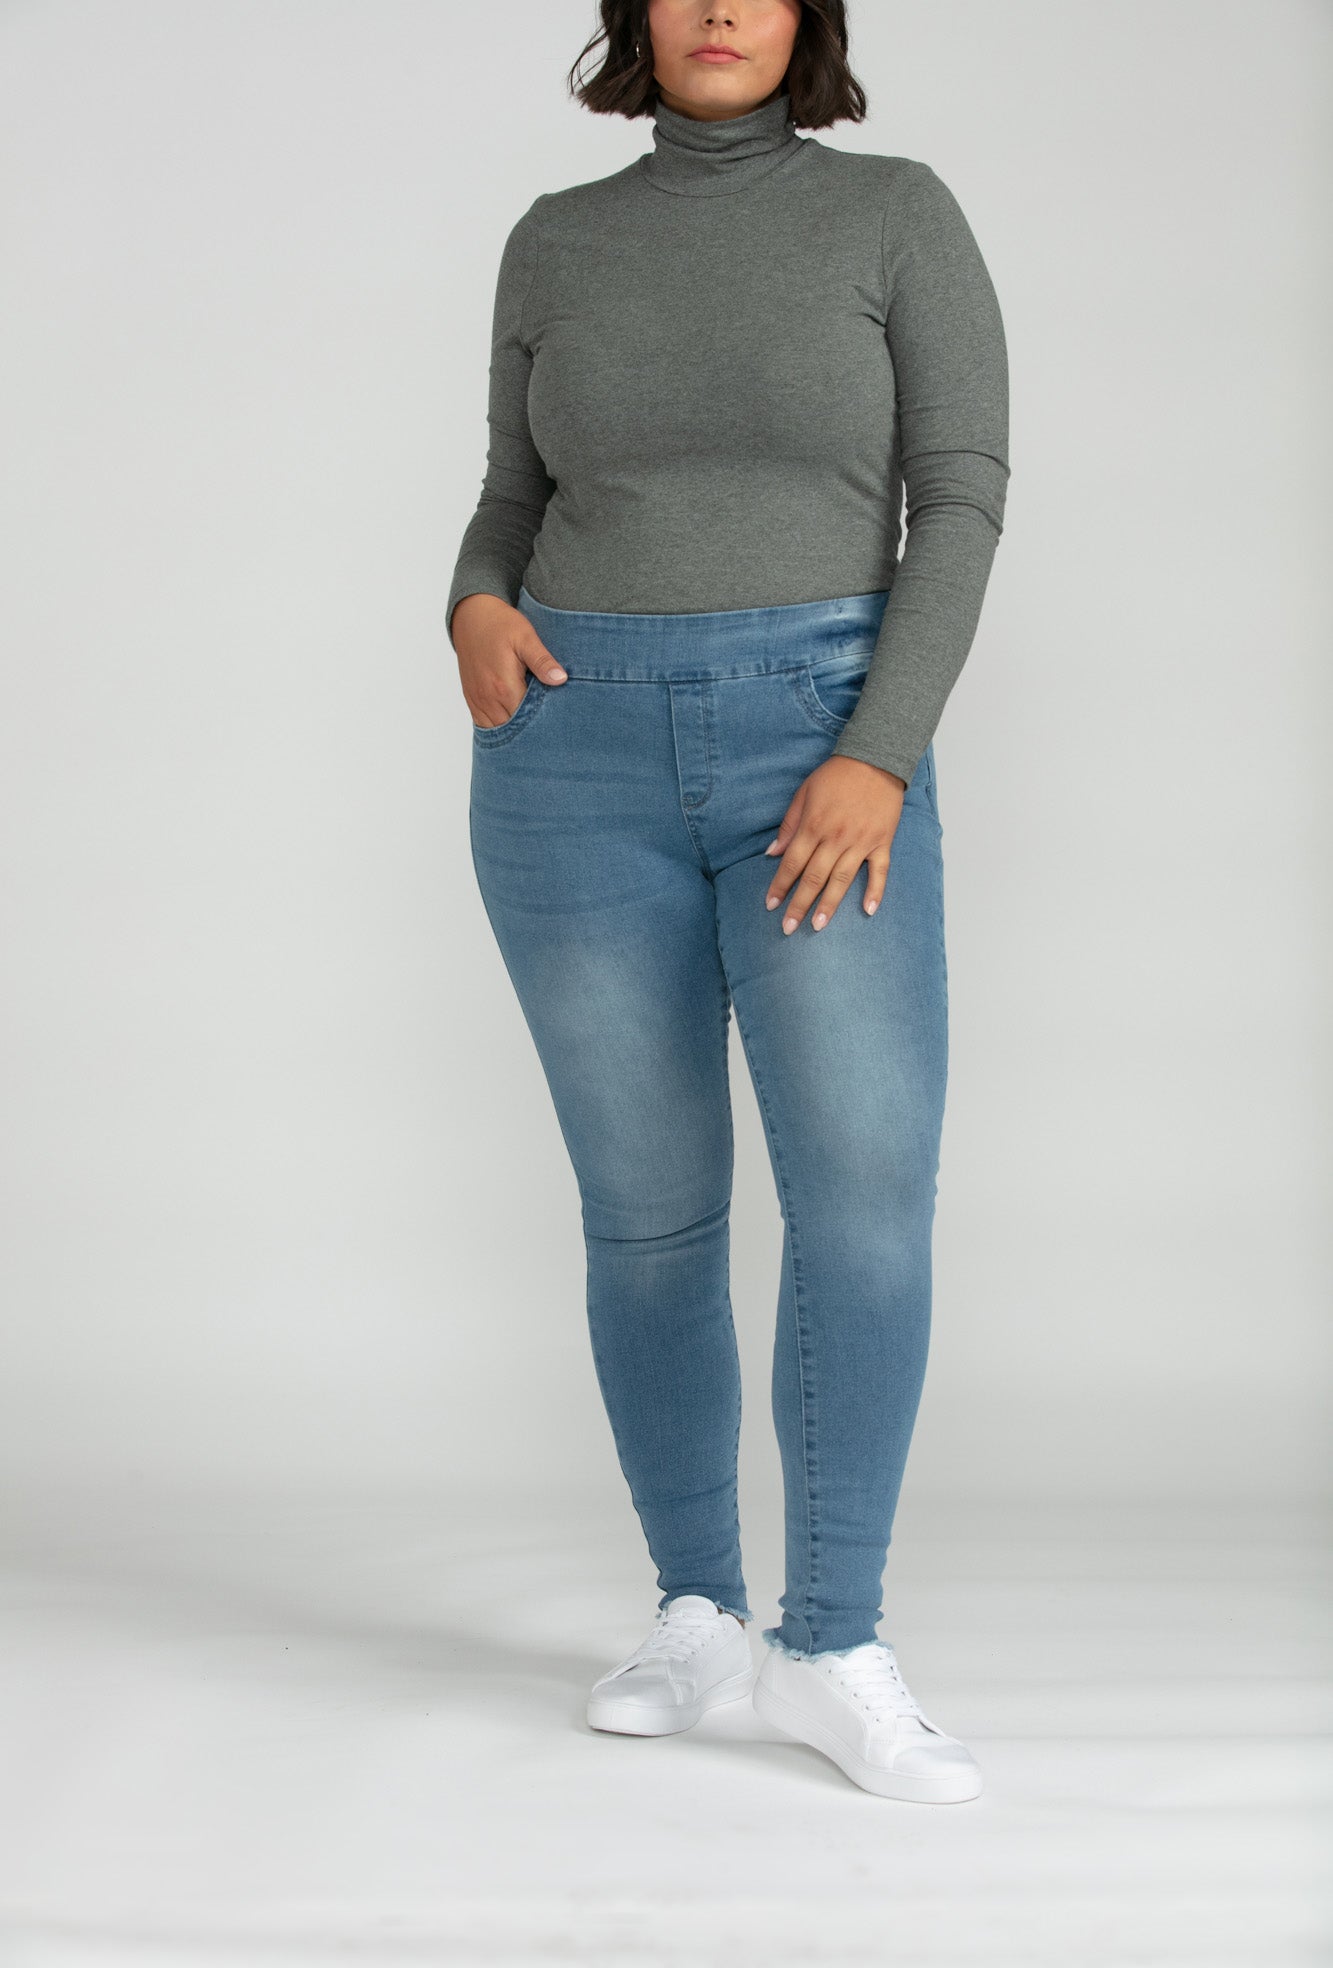 Bluberry Denim Pull-On Ankle length Reese